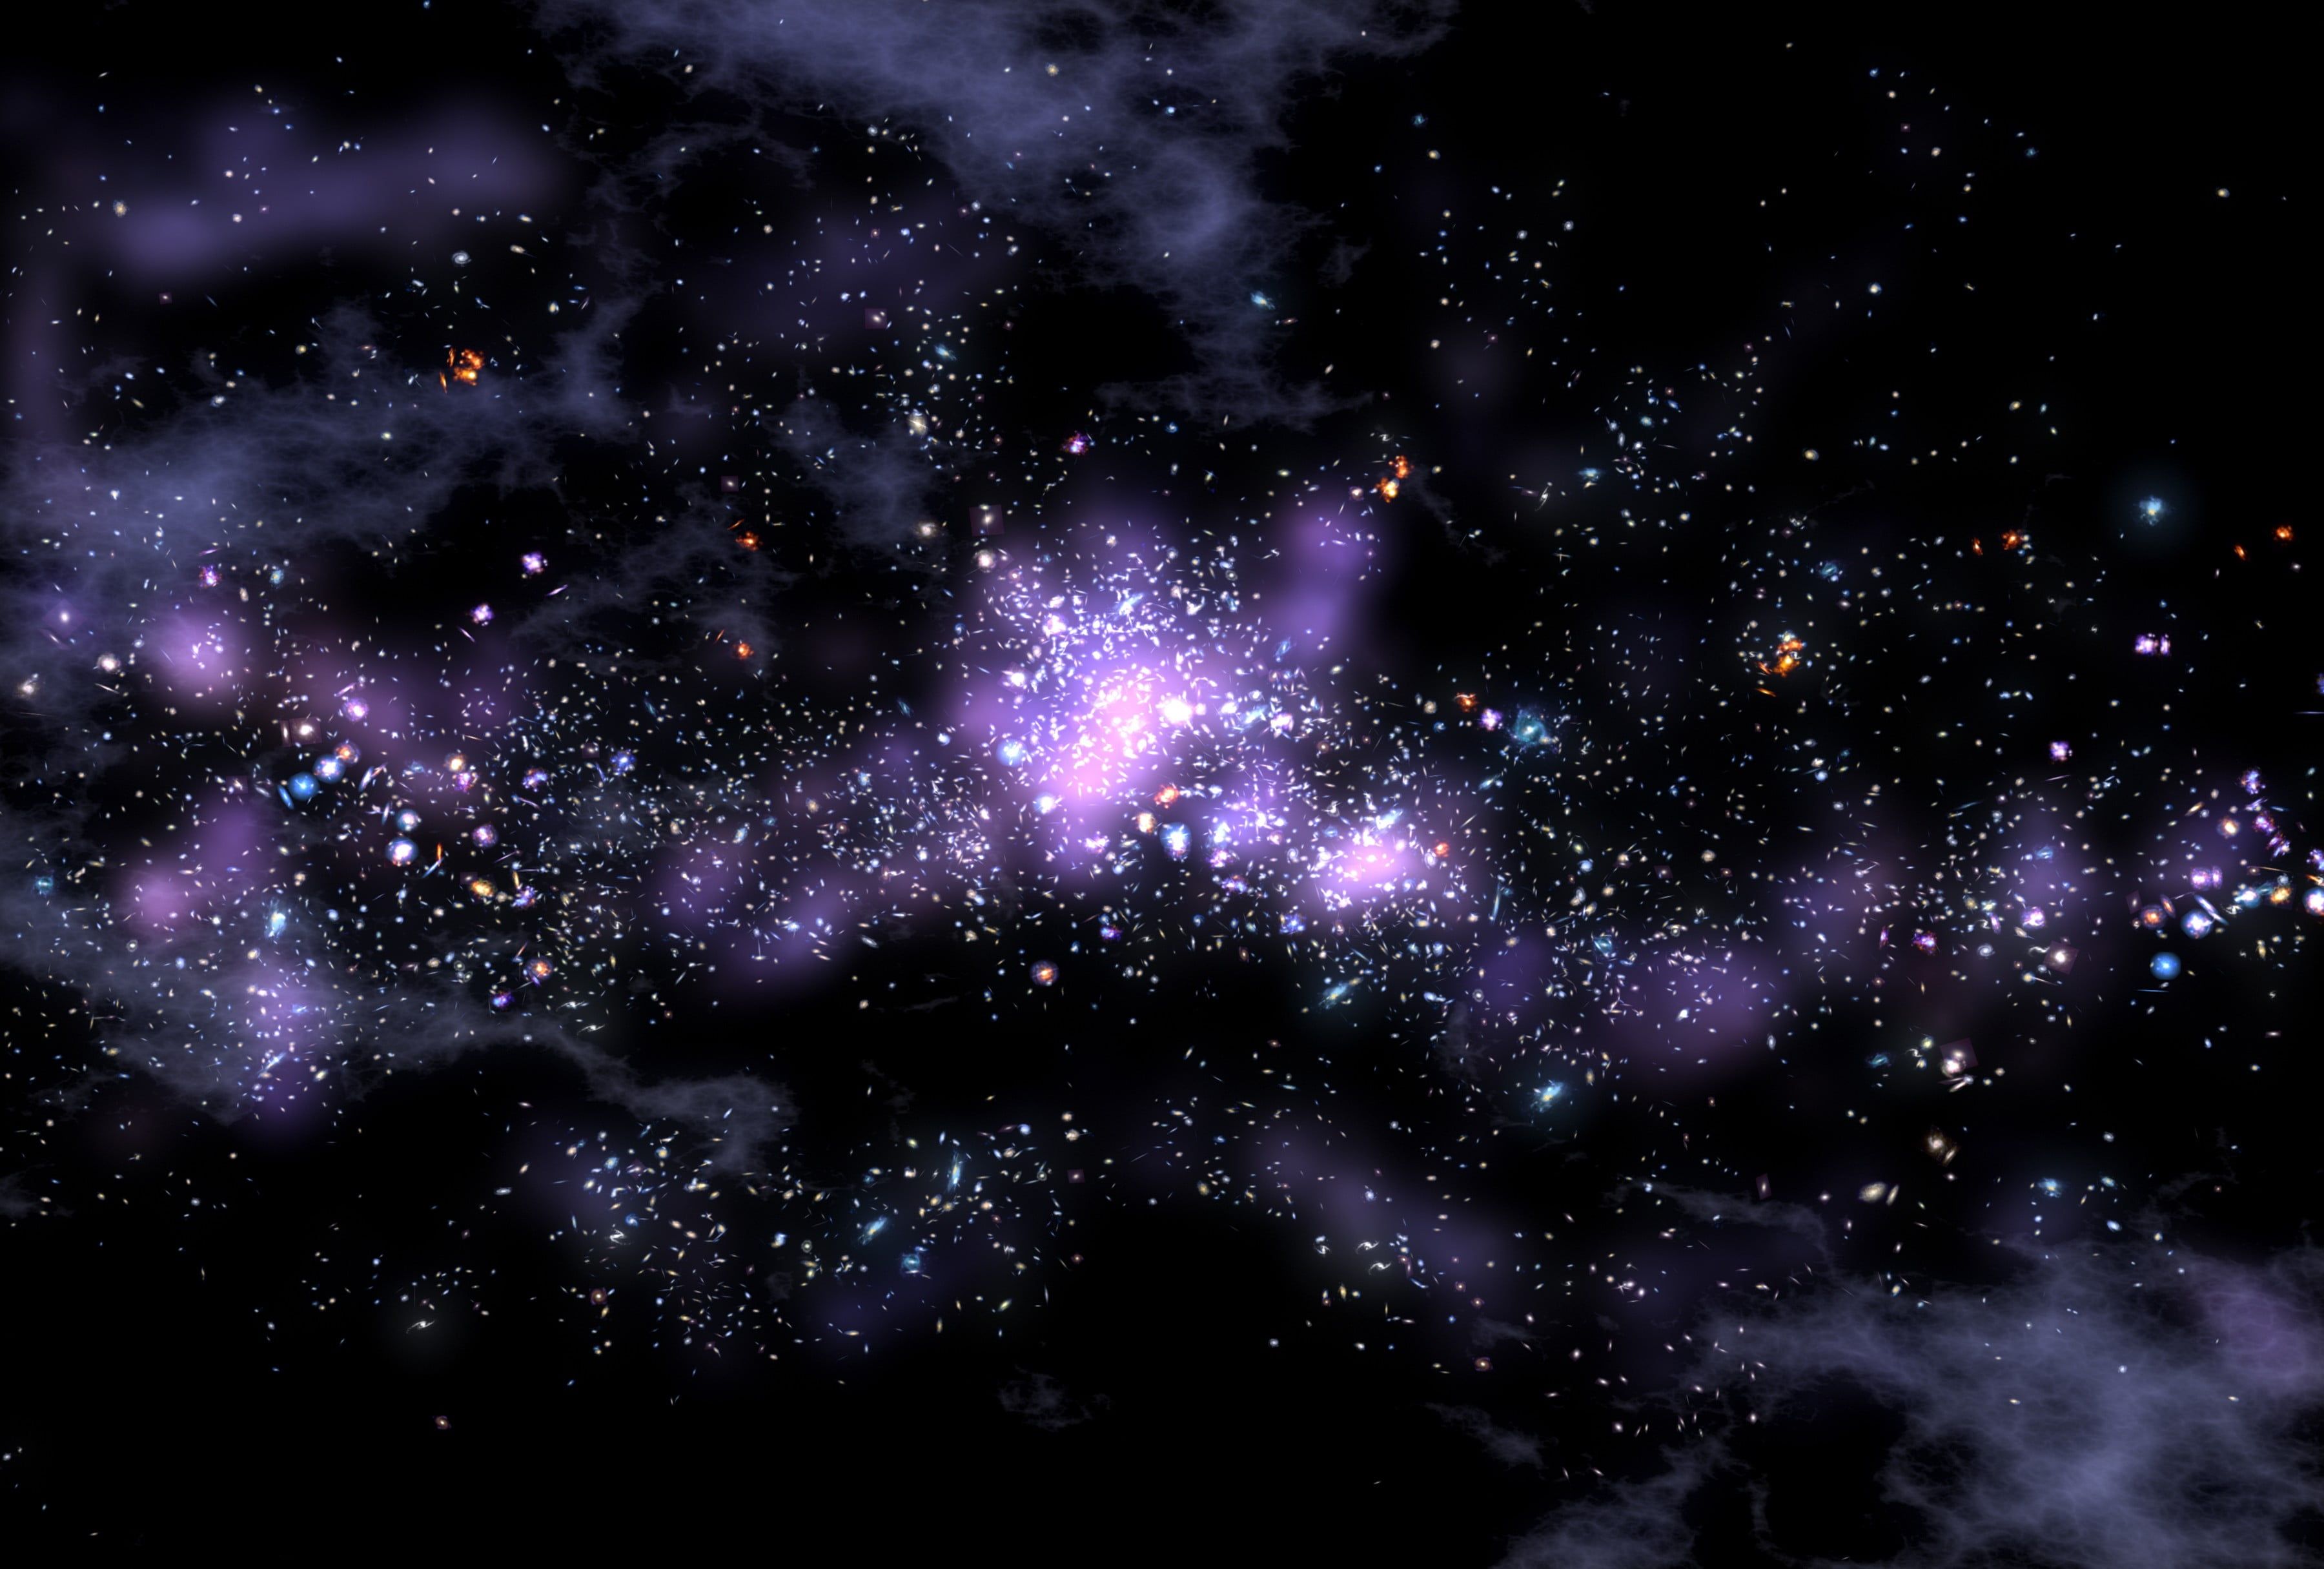 Aesthetic Black Galaxy Wallpapers